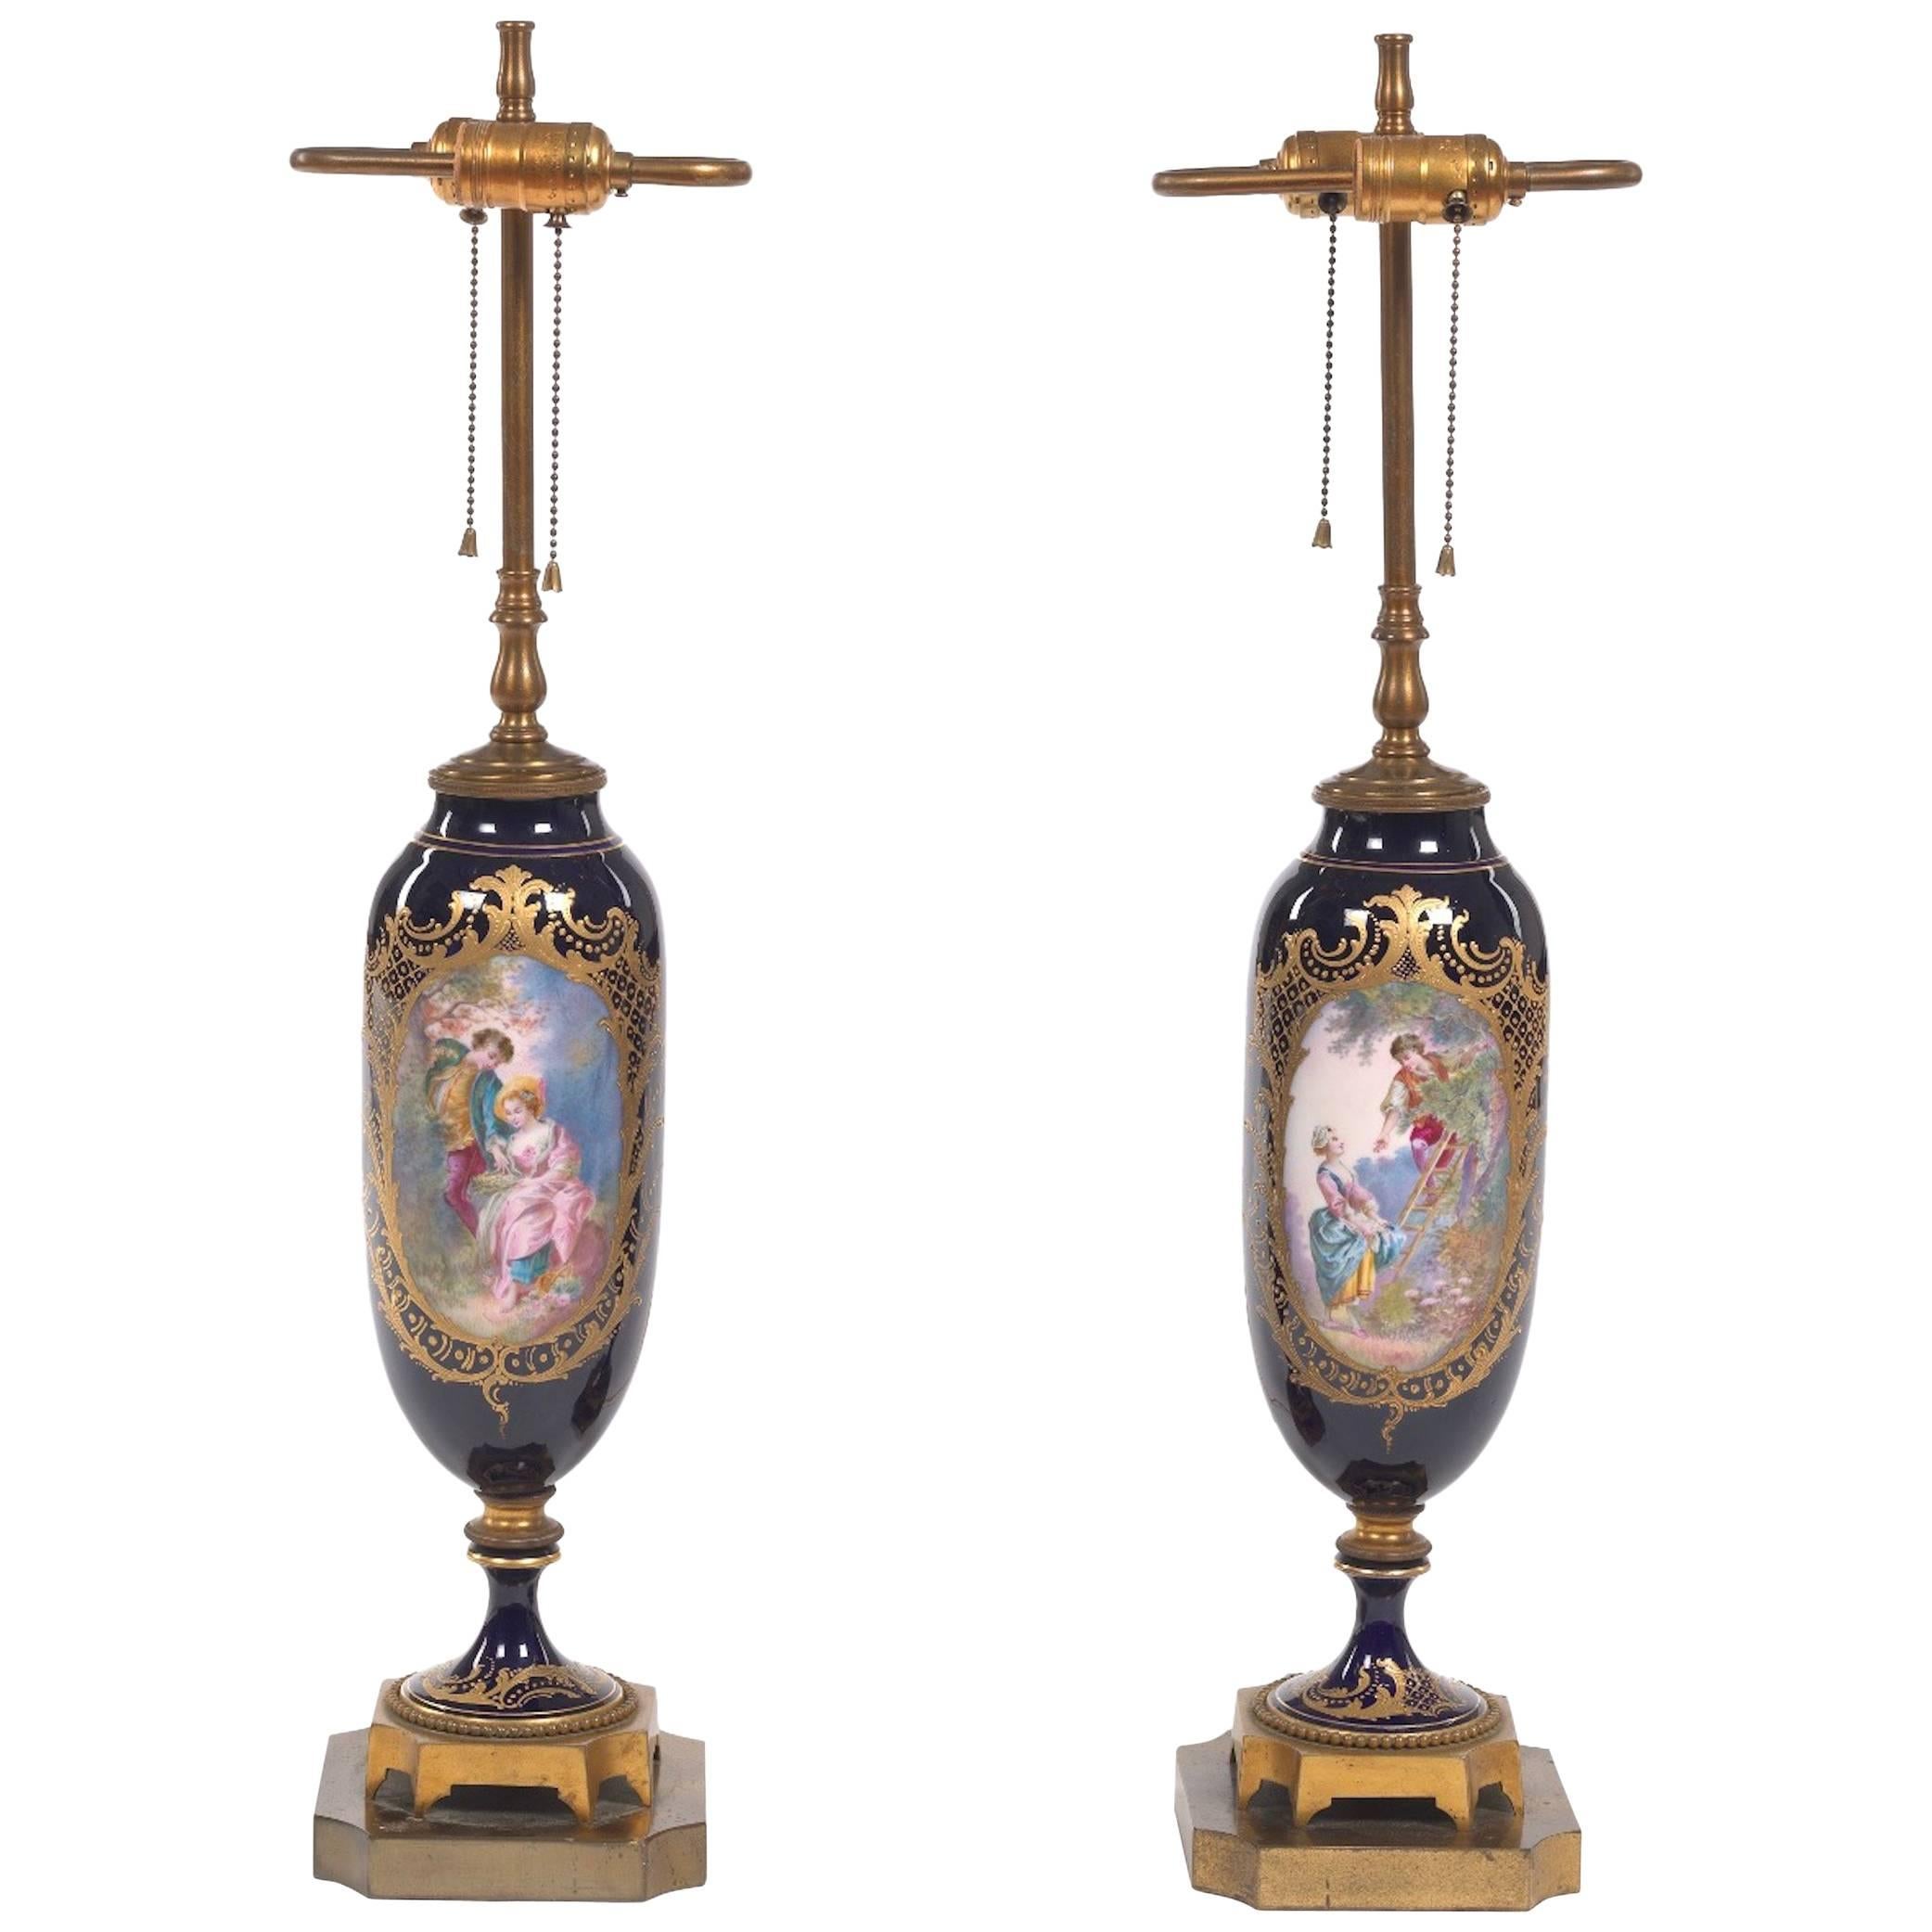 Pair of Sèvres Style Ormolu-Mounted Urns, Now as Lamps